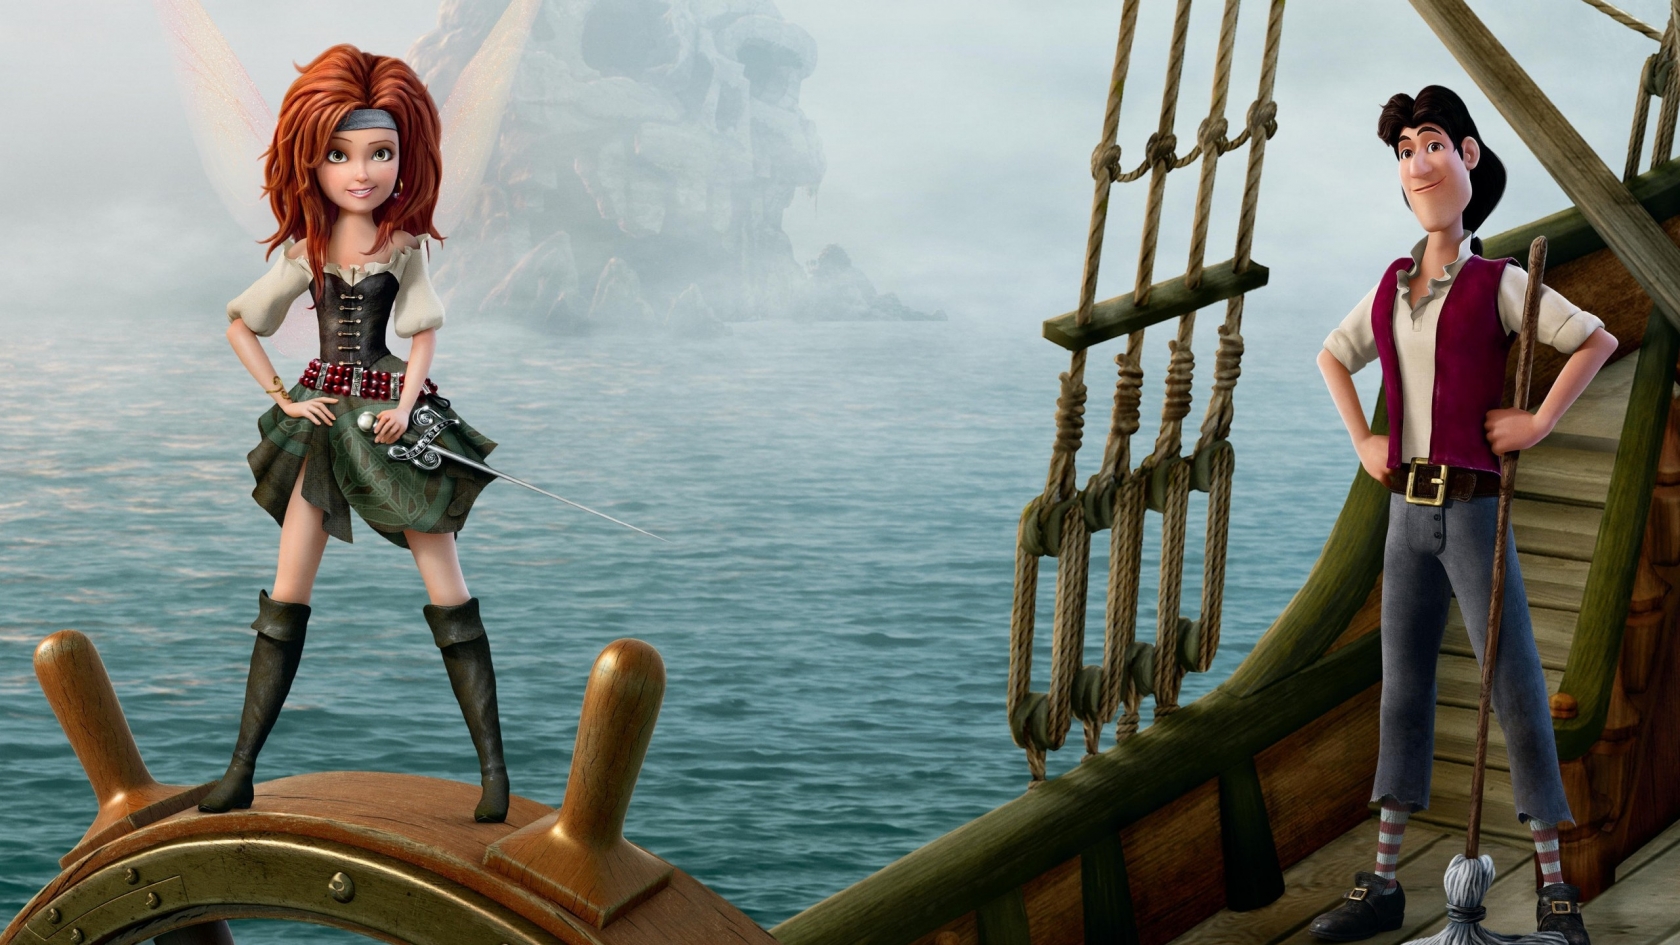 The Pirate Fairy for 1680 x 945 HDTV resolution